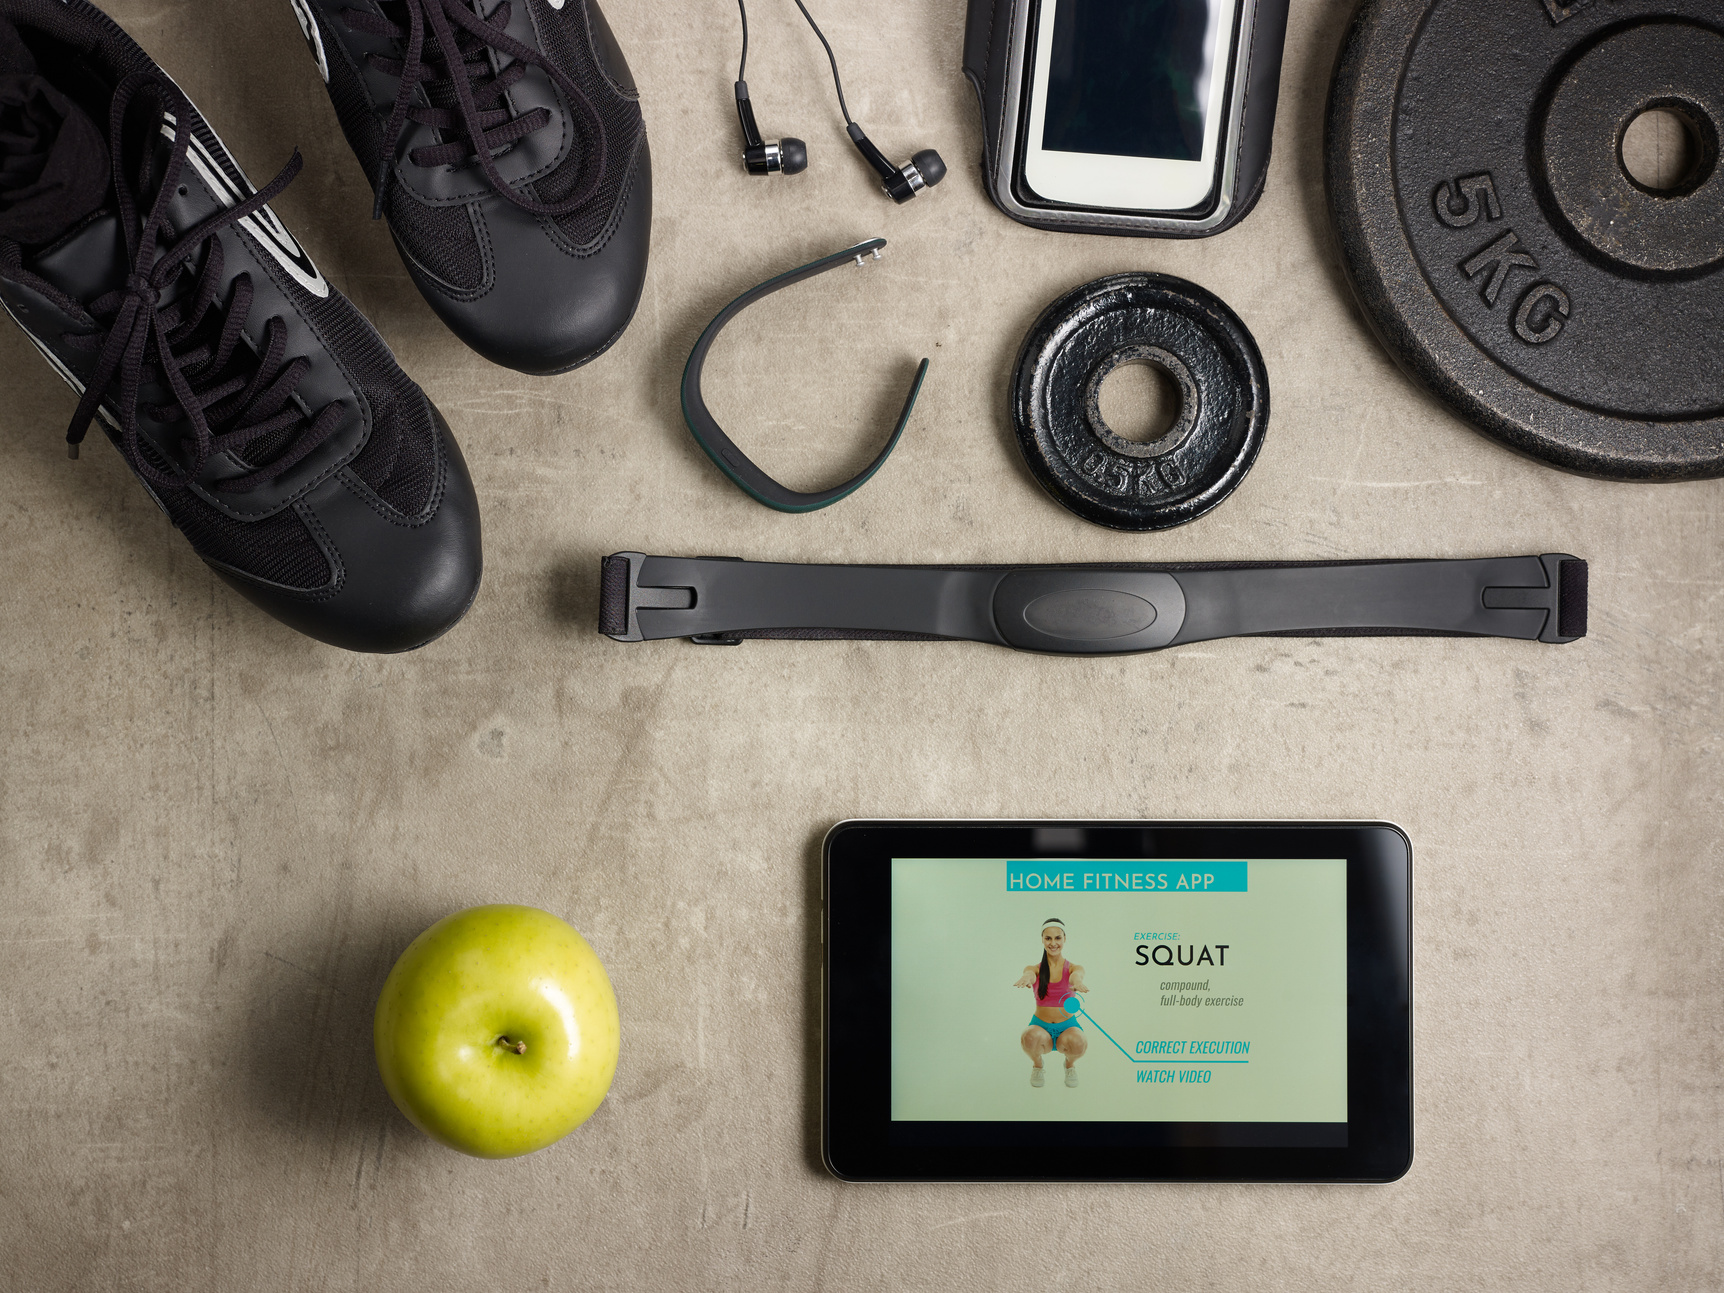 sneakers, hear rate monitor and tablet PC with fitness app